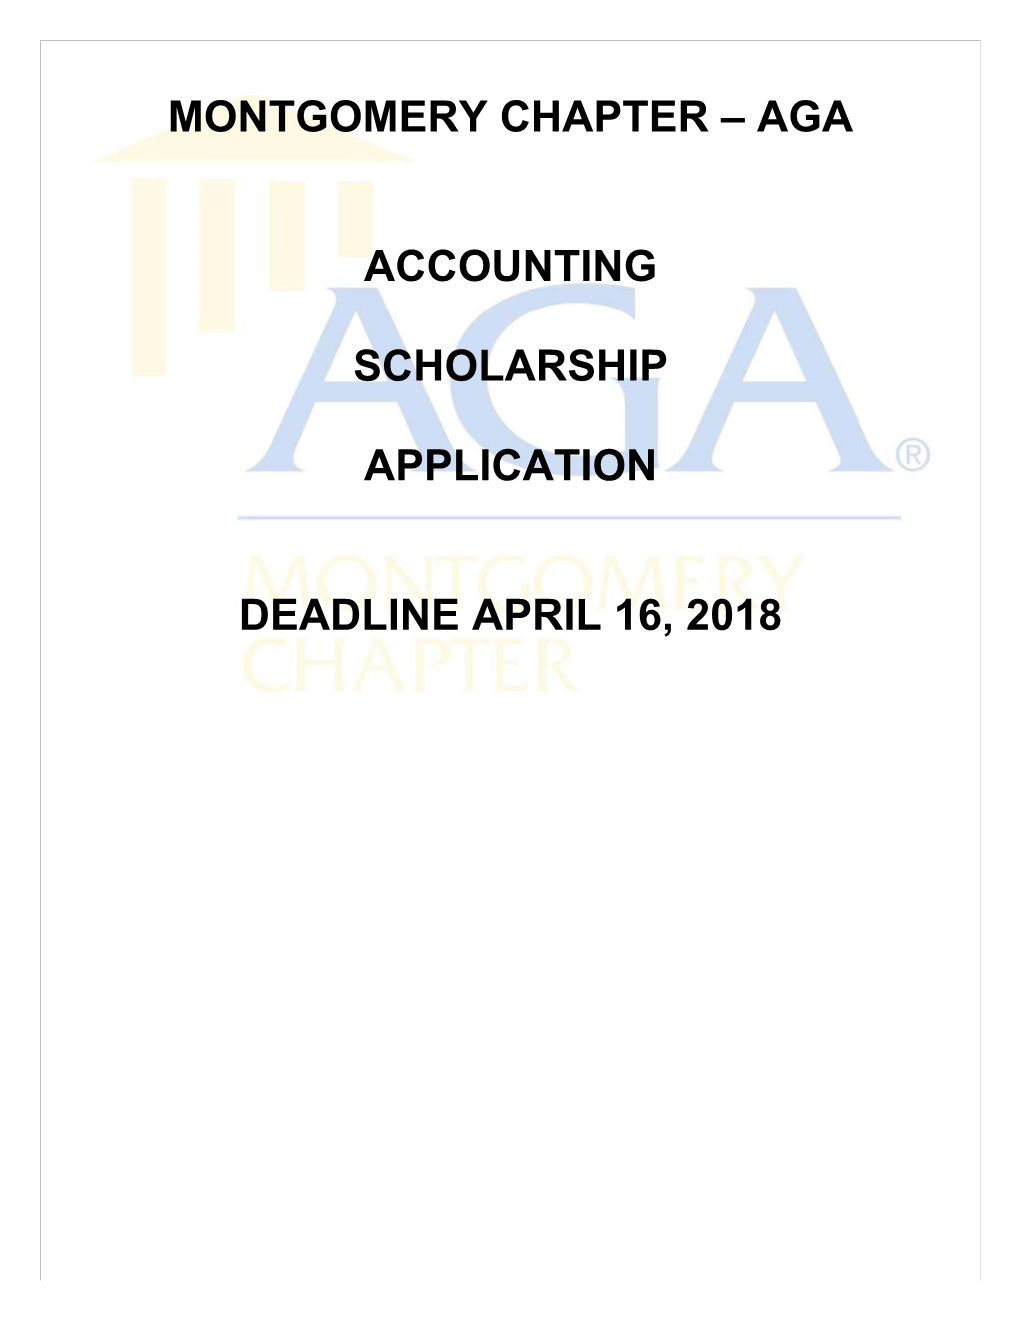 Montgomery Chapter Aga Accounting Scholarship Application Deadline April 9, 2009 Montgomery